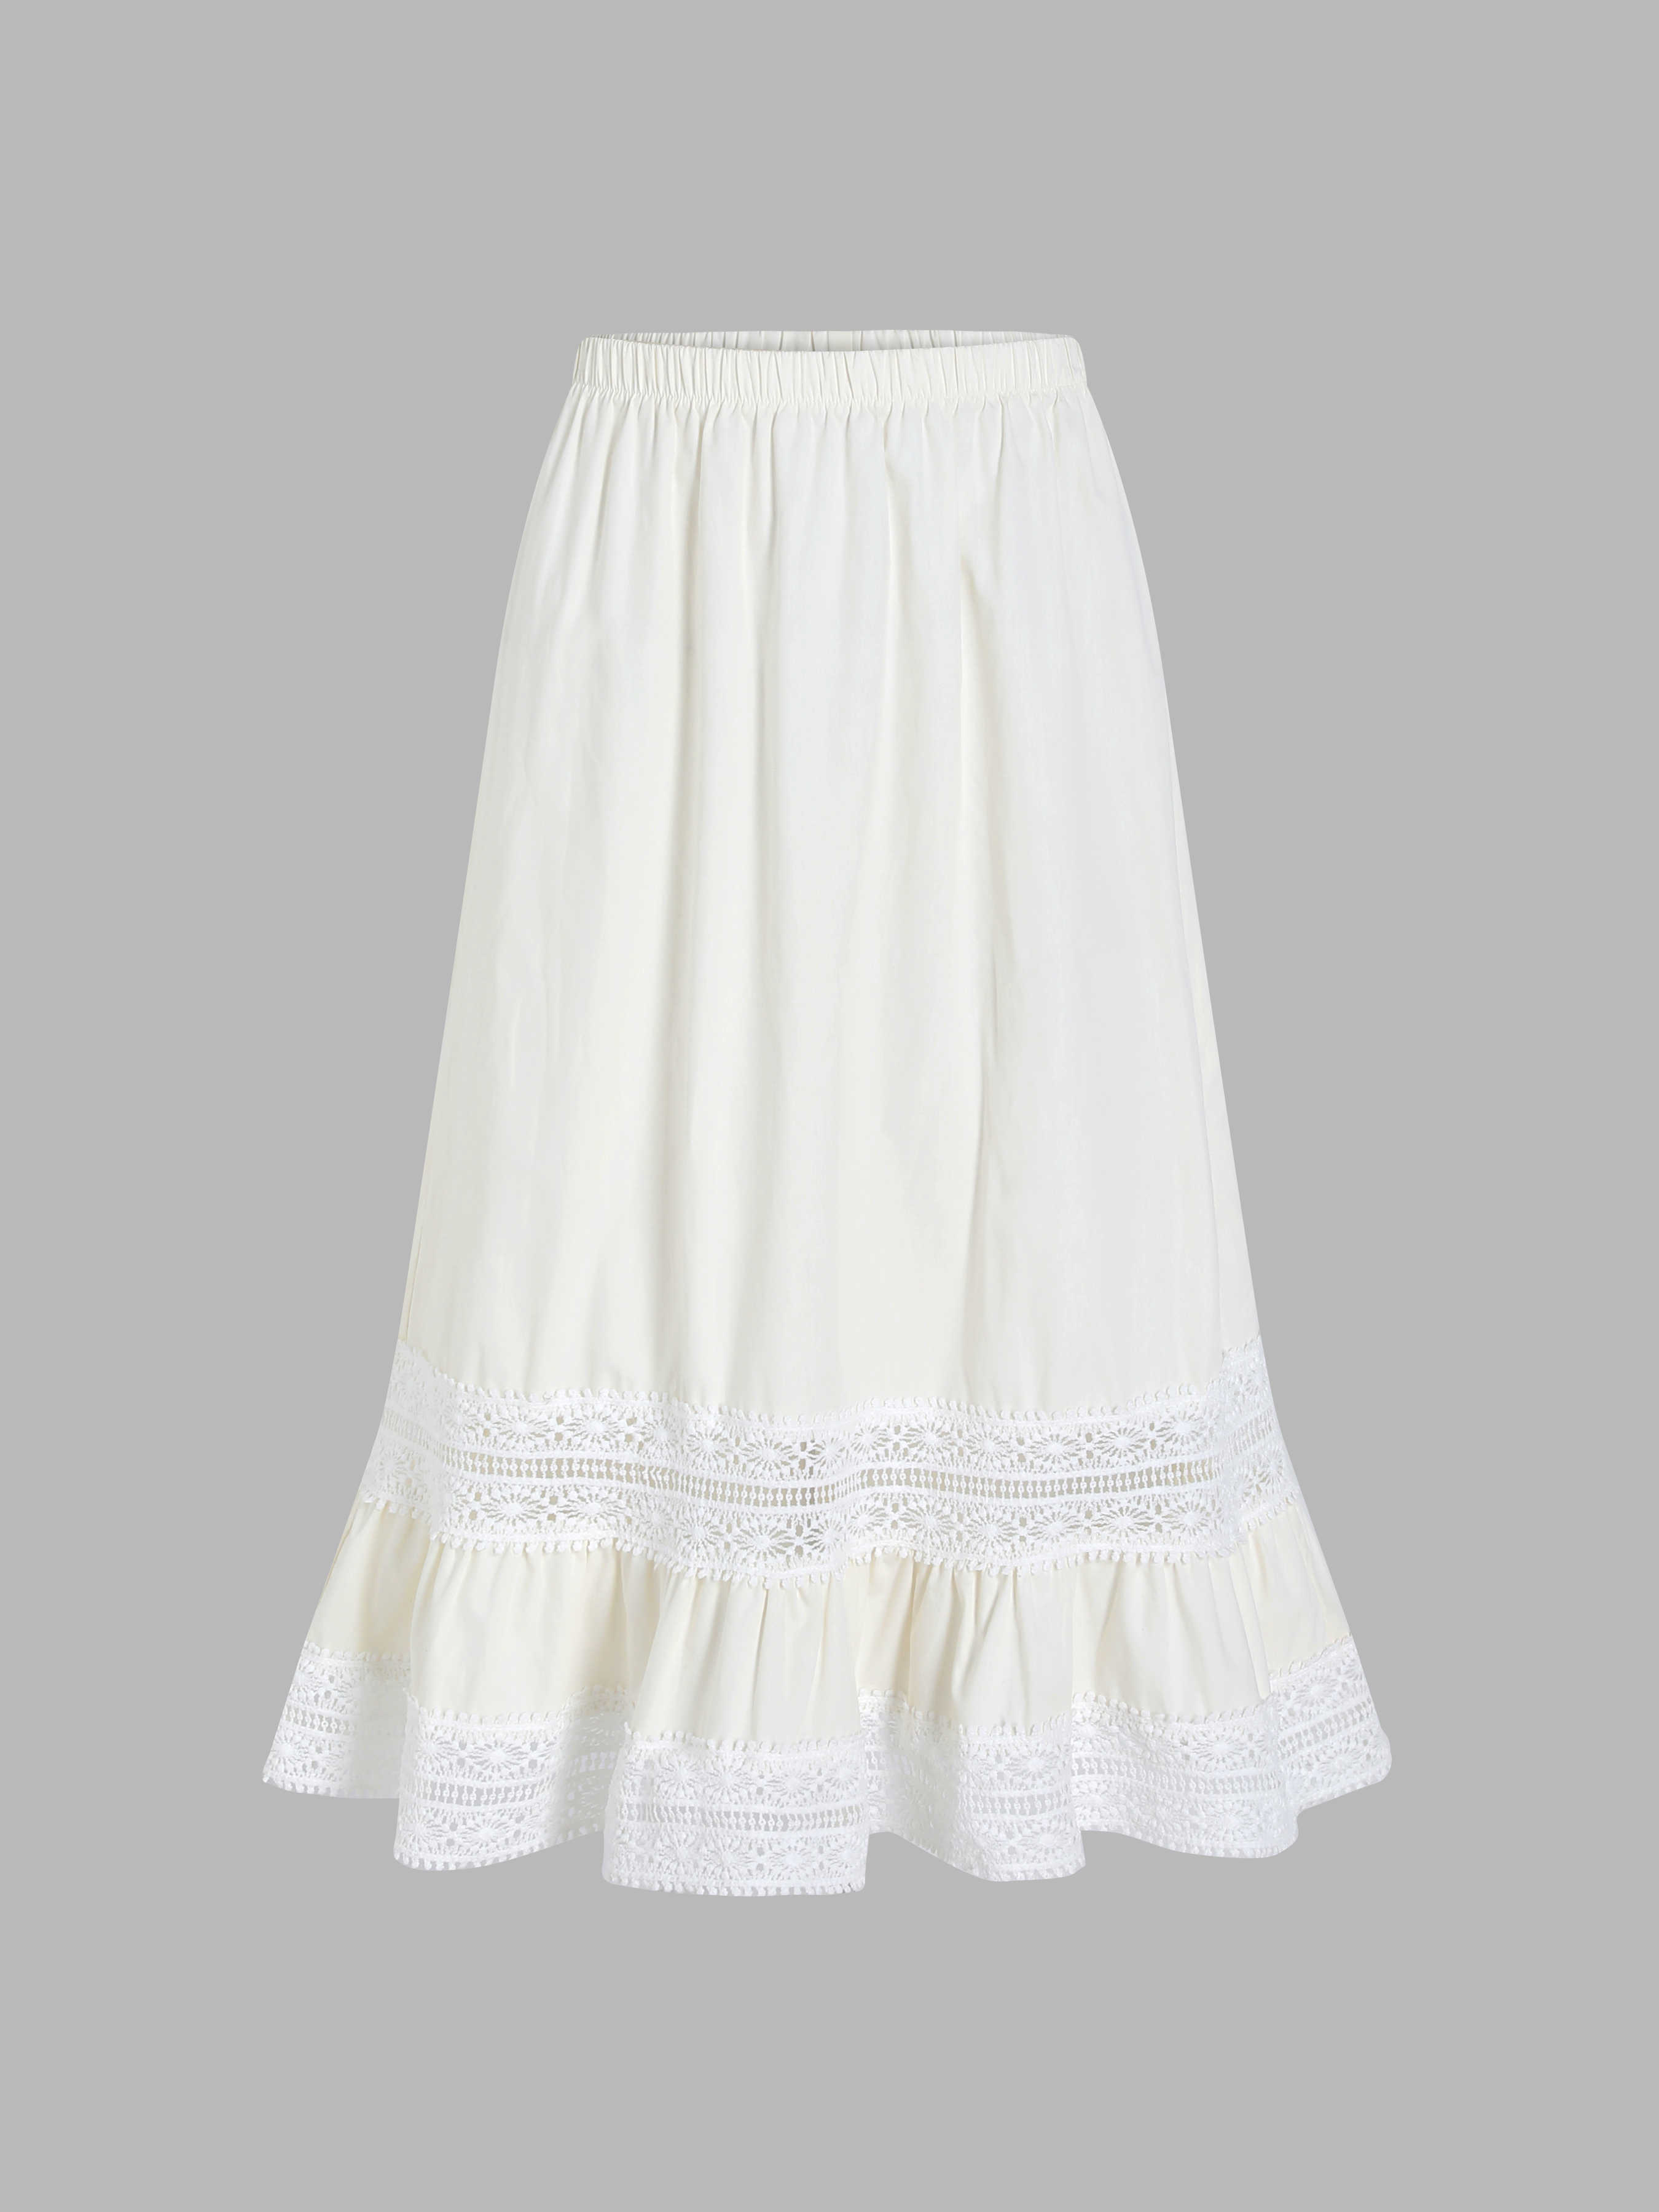 Ruffle Hollow Out Midi Skirt - Cider